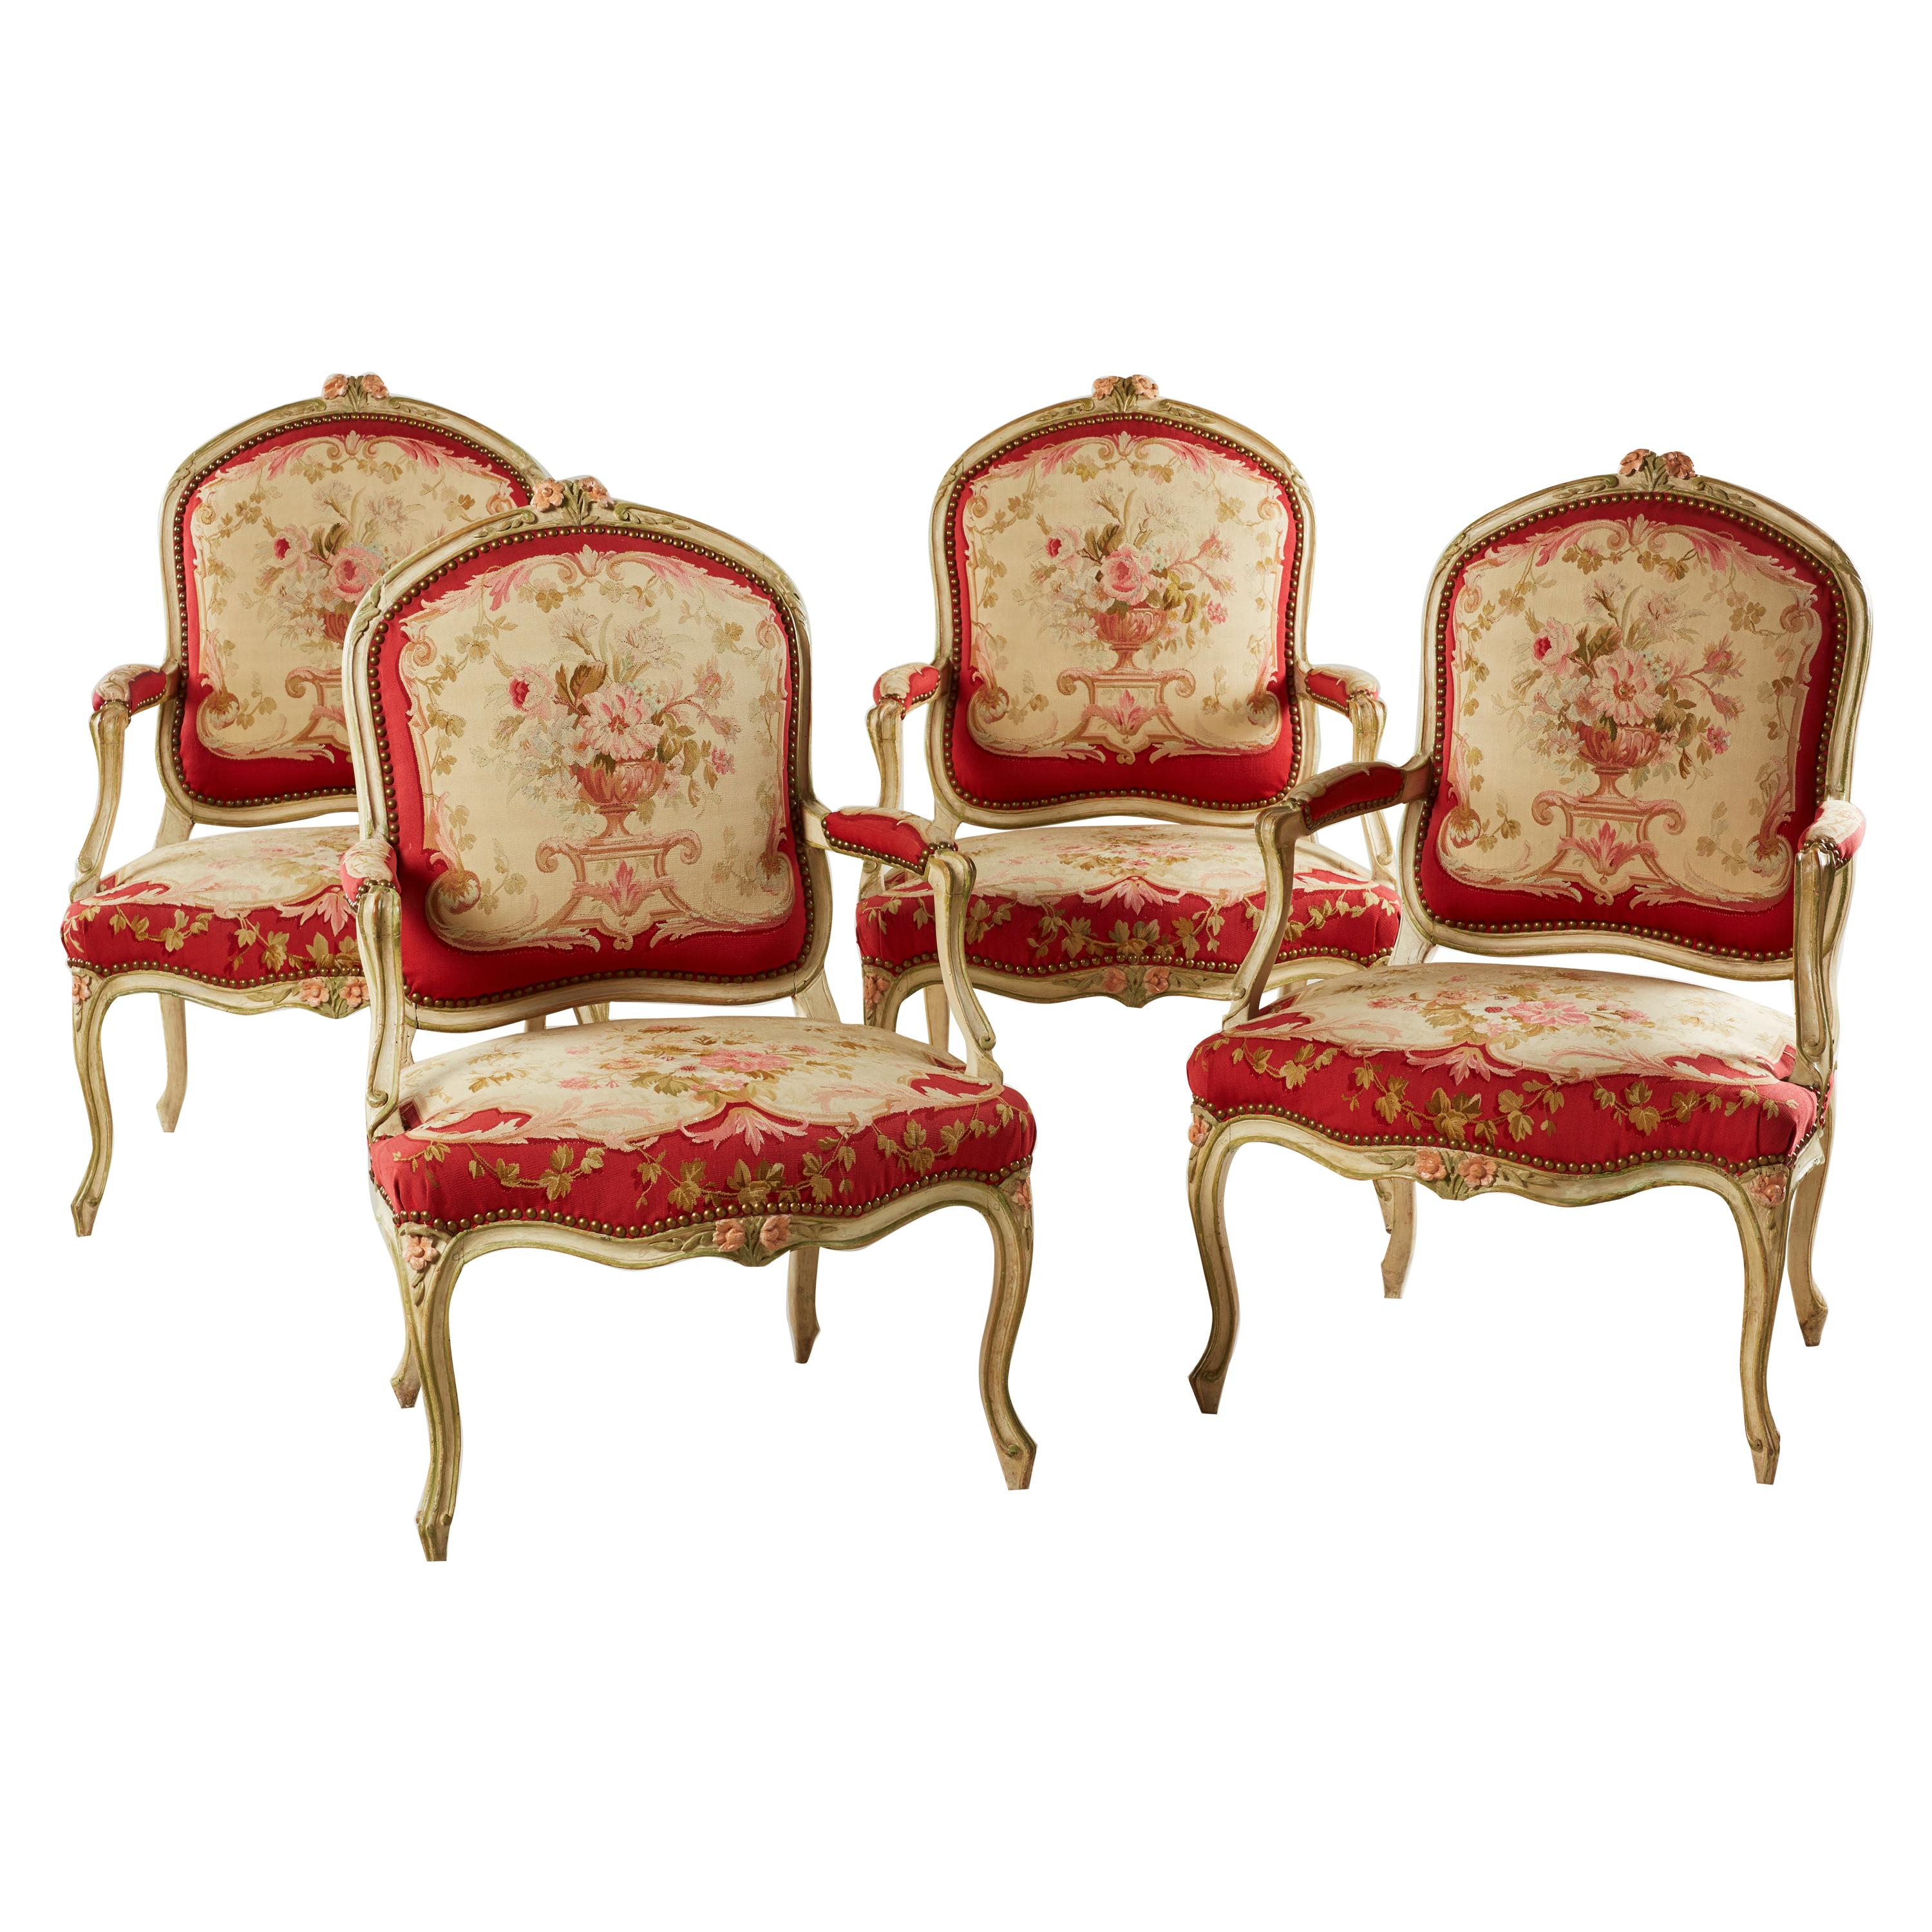 Set of Four French Mid-18th Century Rococo Louis XV Painted Fauteuils For Sale